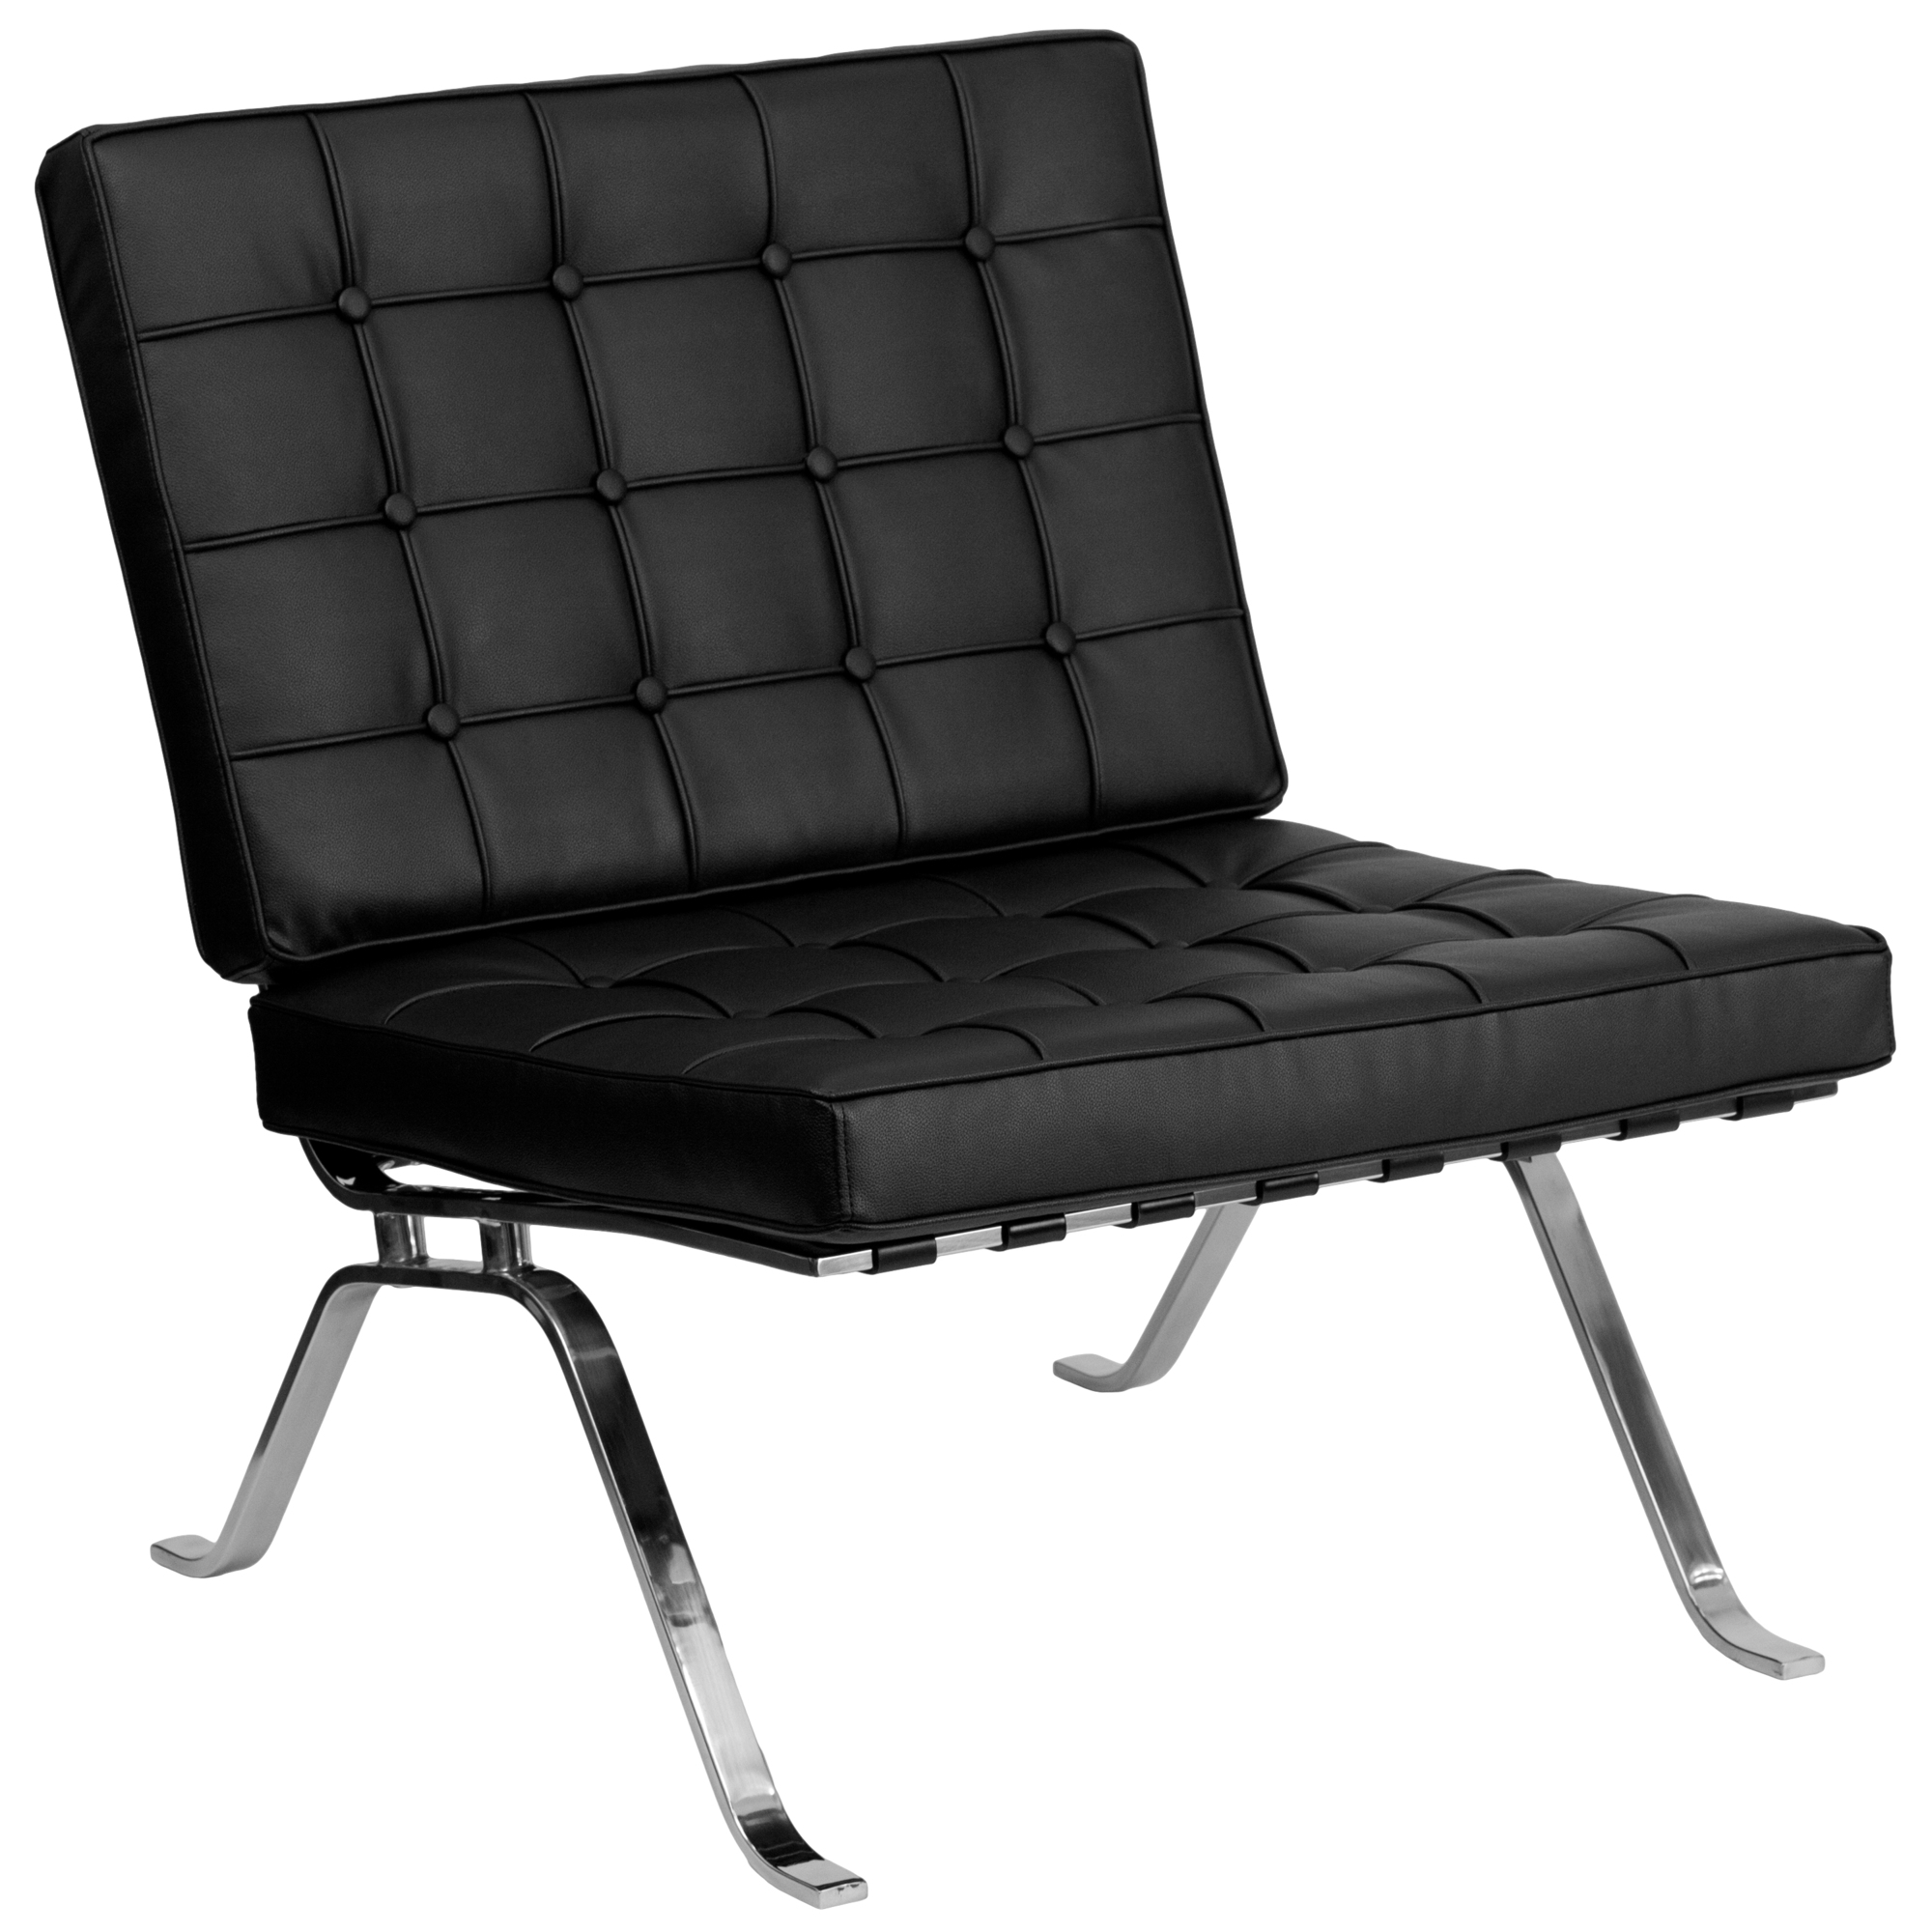 Flash Furniture, Black LeatherSoft Lounge Chair with Curved Legs, Primary Color Black, Included (qty.) 1, Model ZBFLC801CHBK